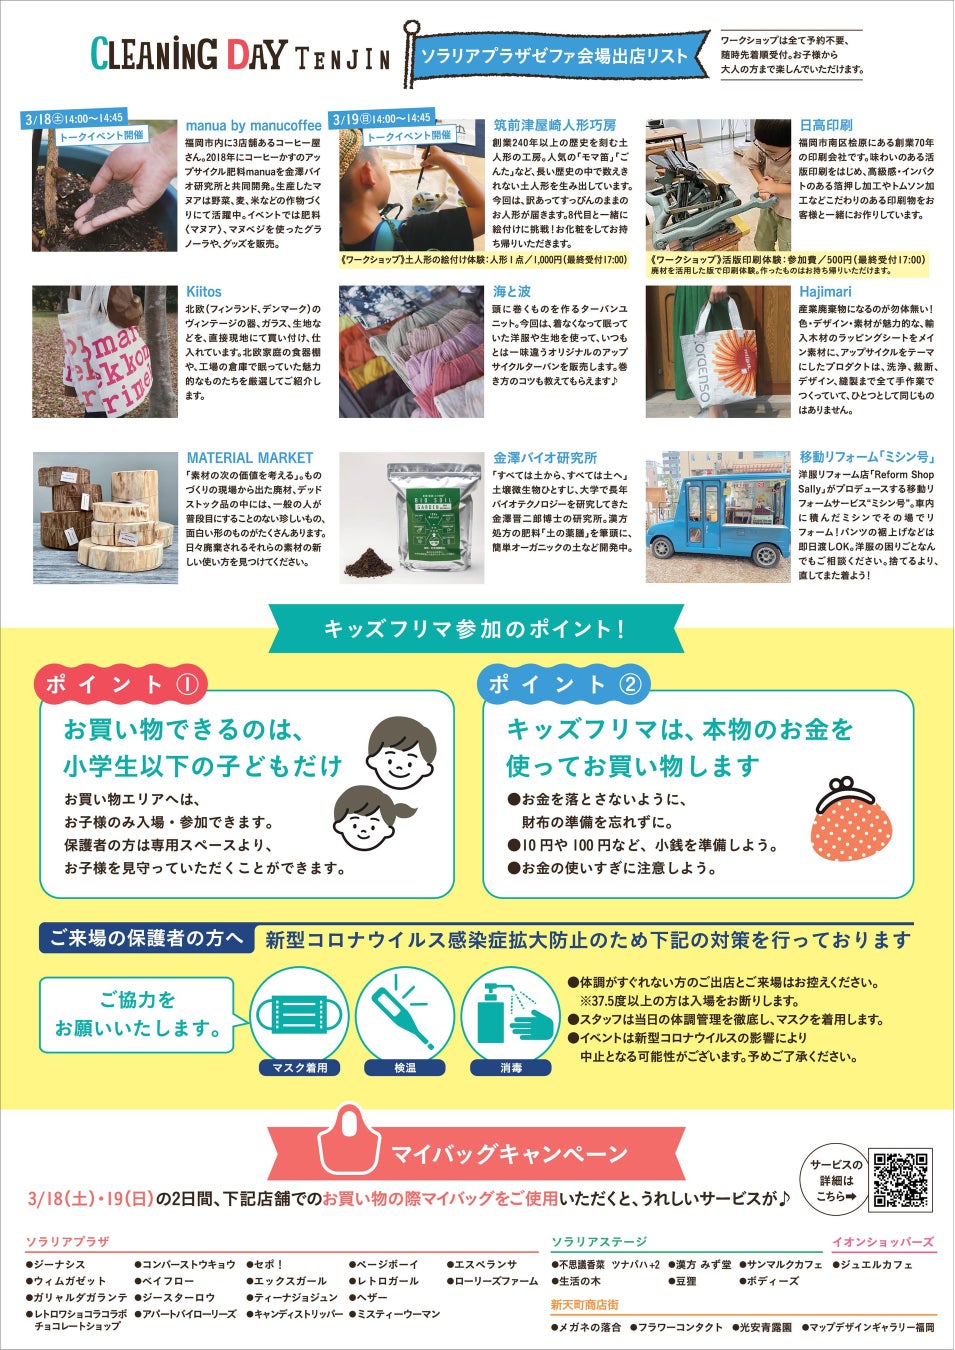 「CLEANiNG DAY TENJIN」を開催いたします！【3/18(土)～3/19(日)】のサブ画像2